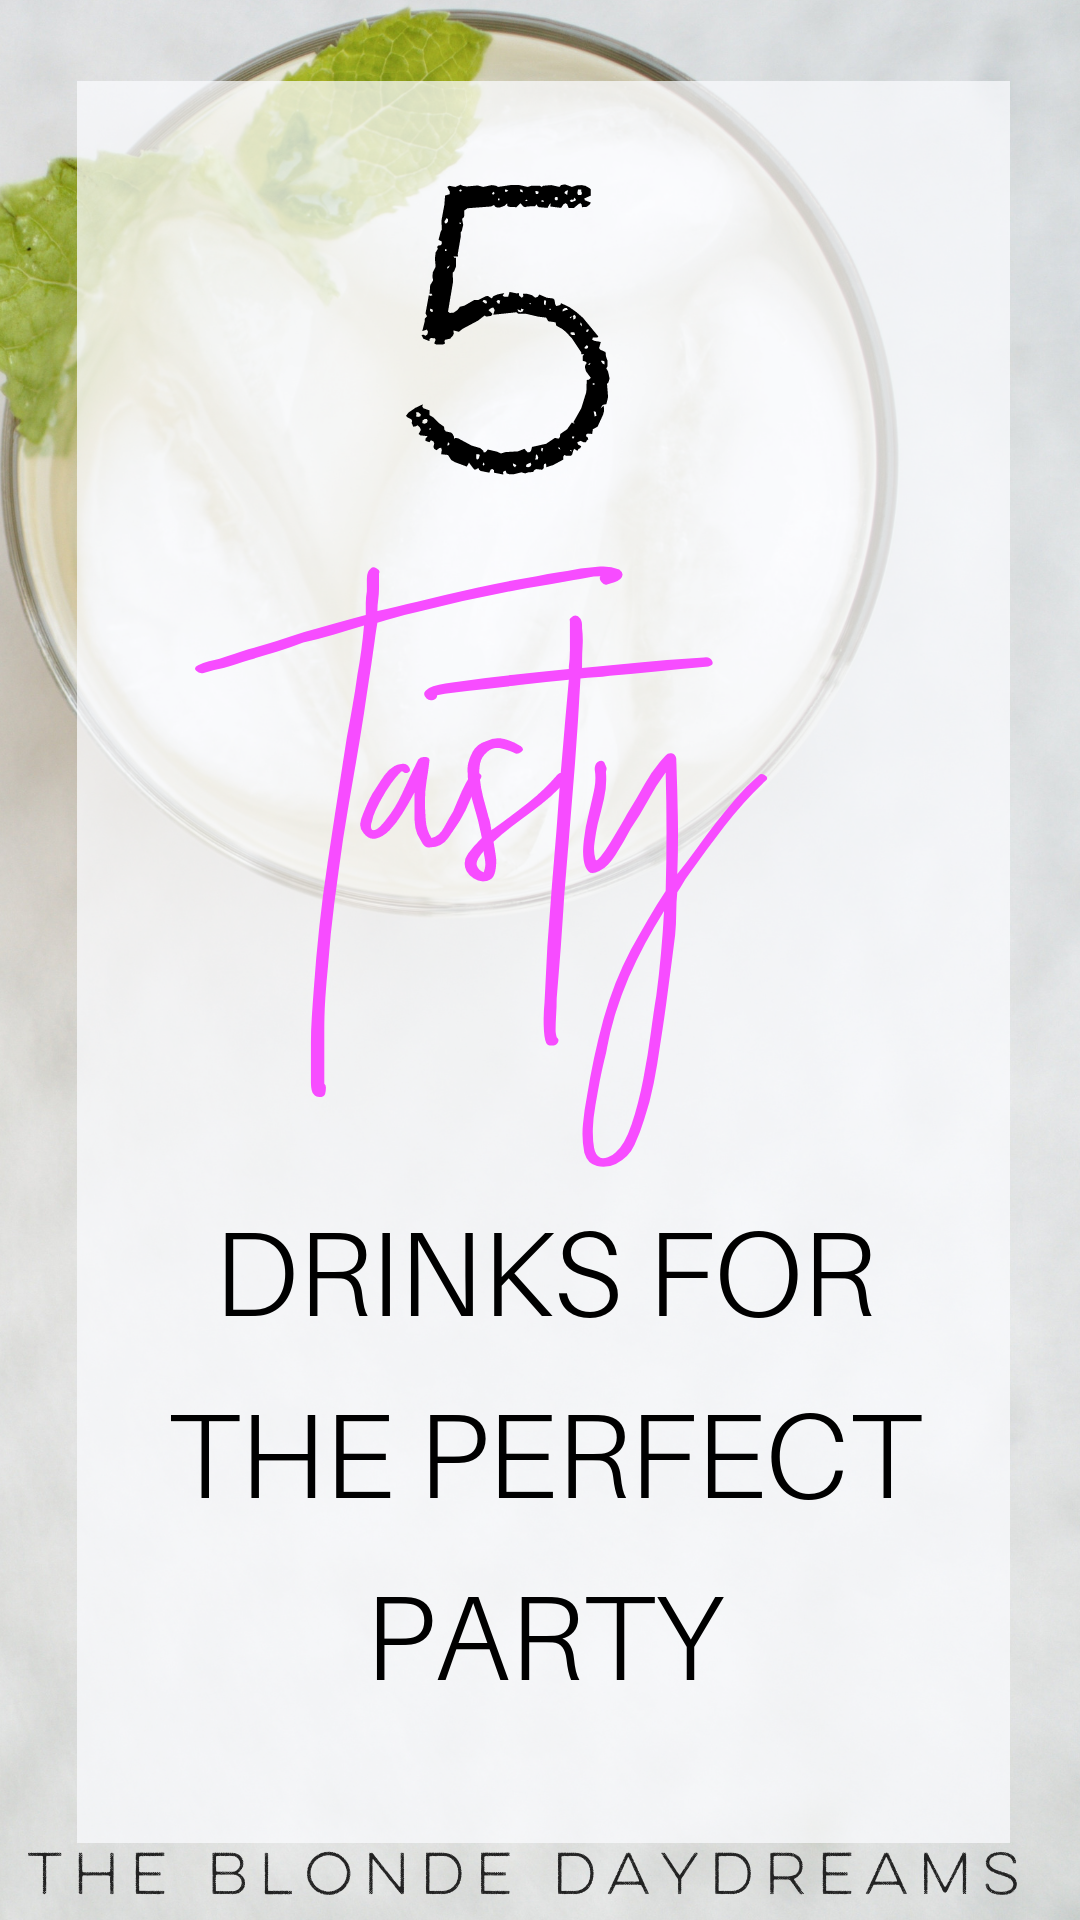 5 Tasty Drinks Guaranteed to Make Your Next Party Perfect. There's something for everyone in here!